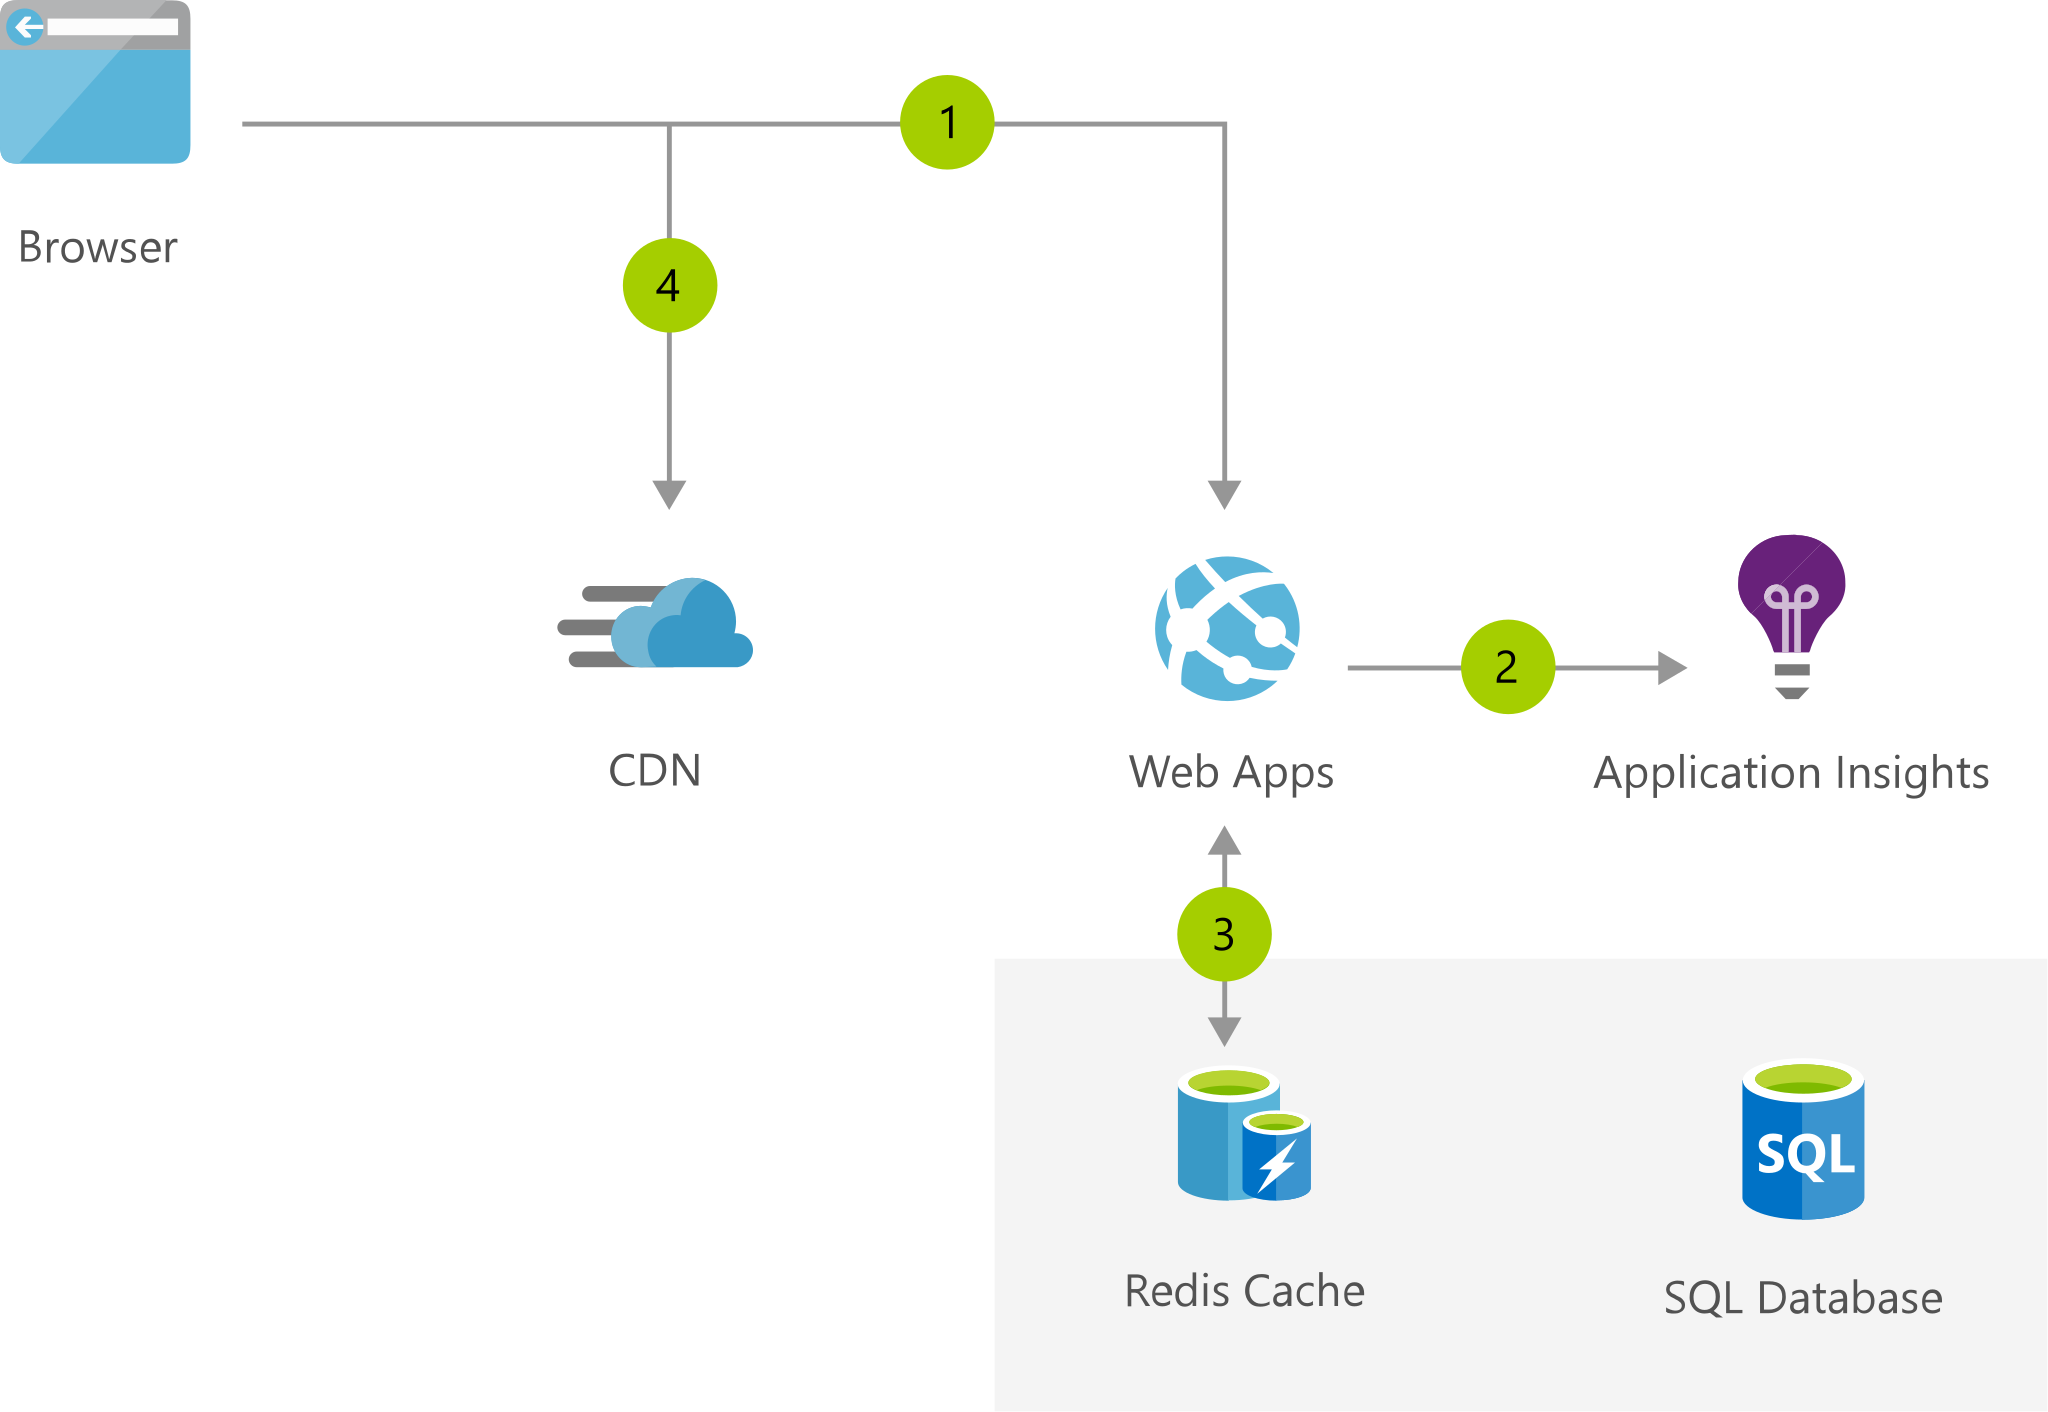 Architecture diagram shows browser to Web Apps then Application Insights and Redis Cache then pulling resources from Azure Content Delivery Network.